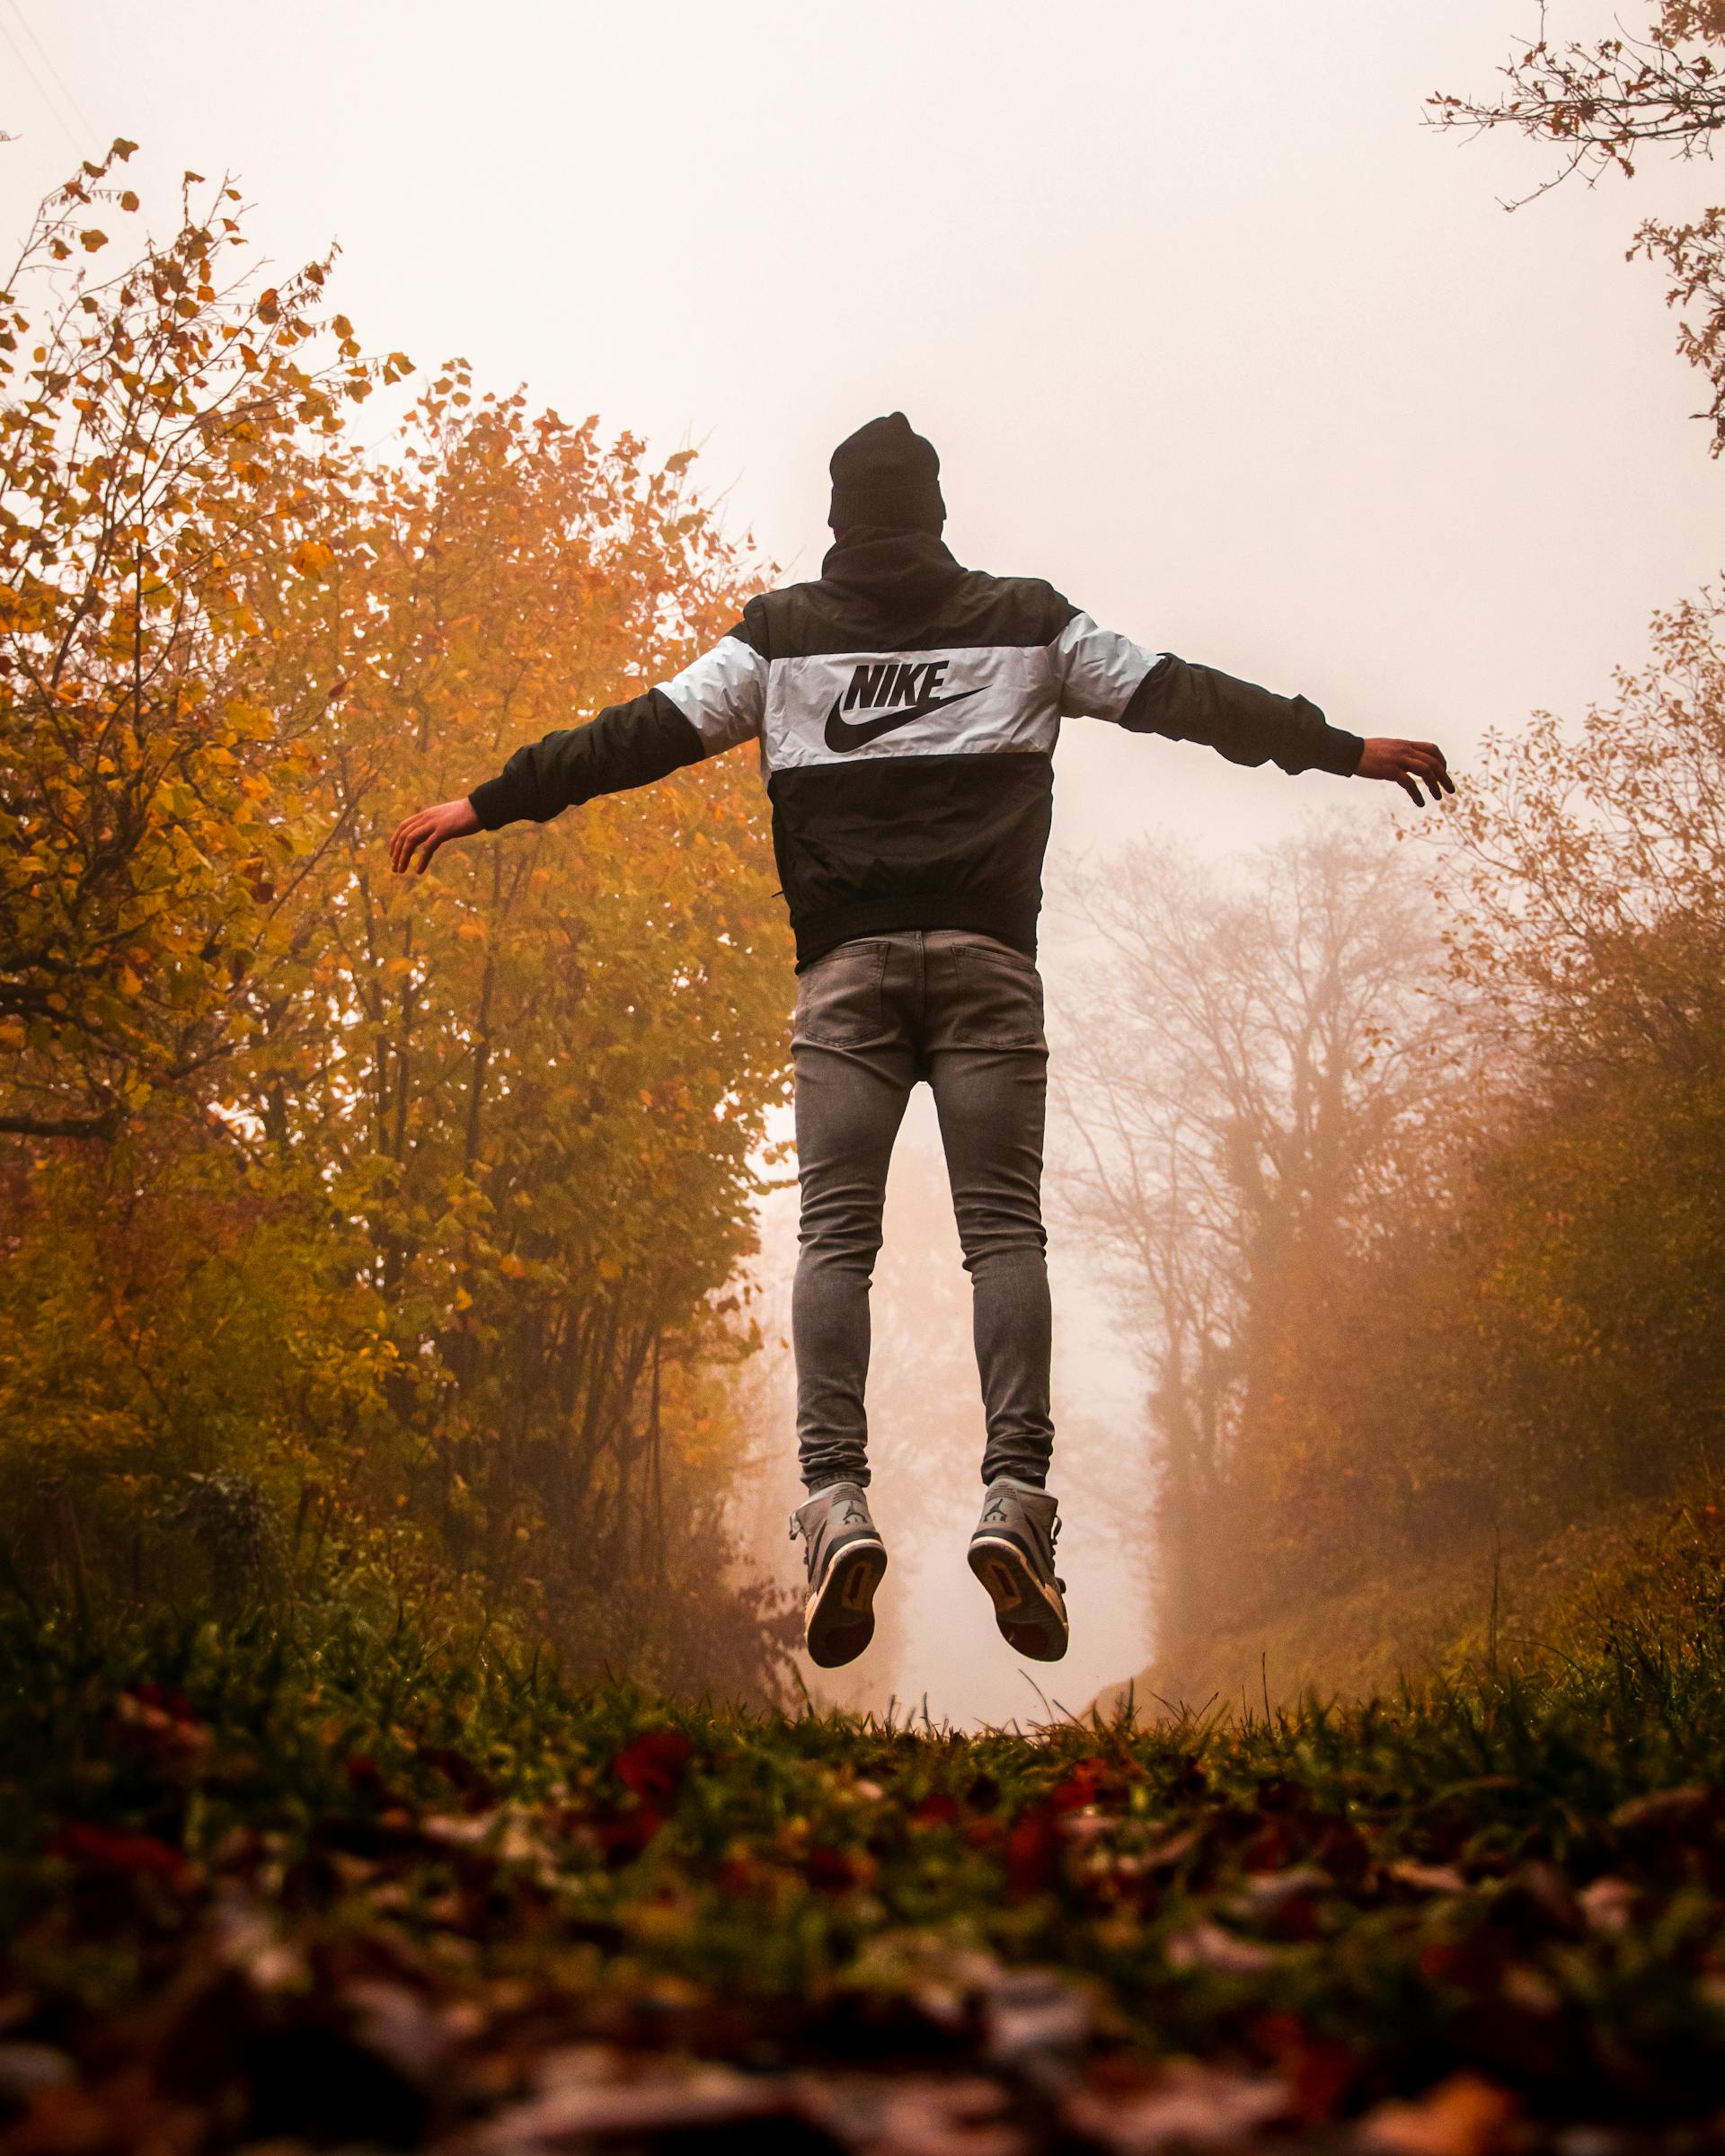 A man in a Nike hoodie and gray pants jumping in the air | Source: Pexels